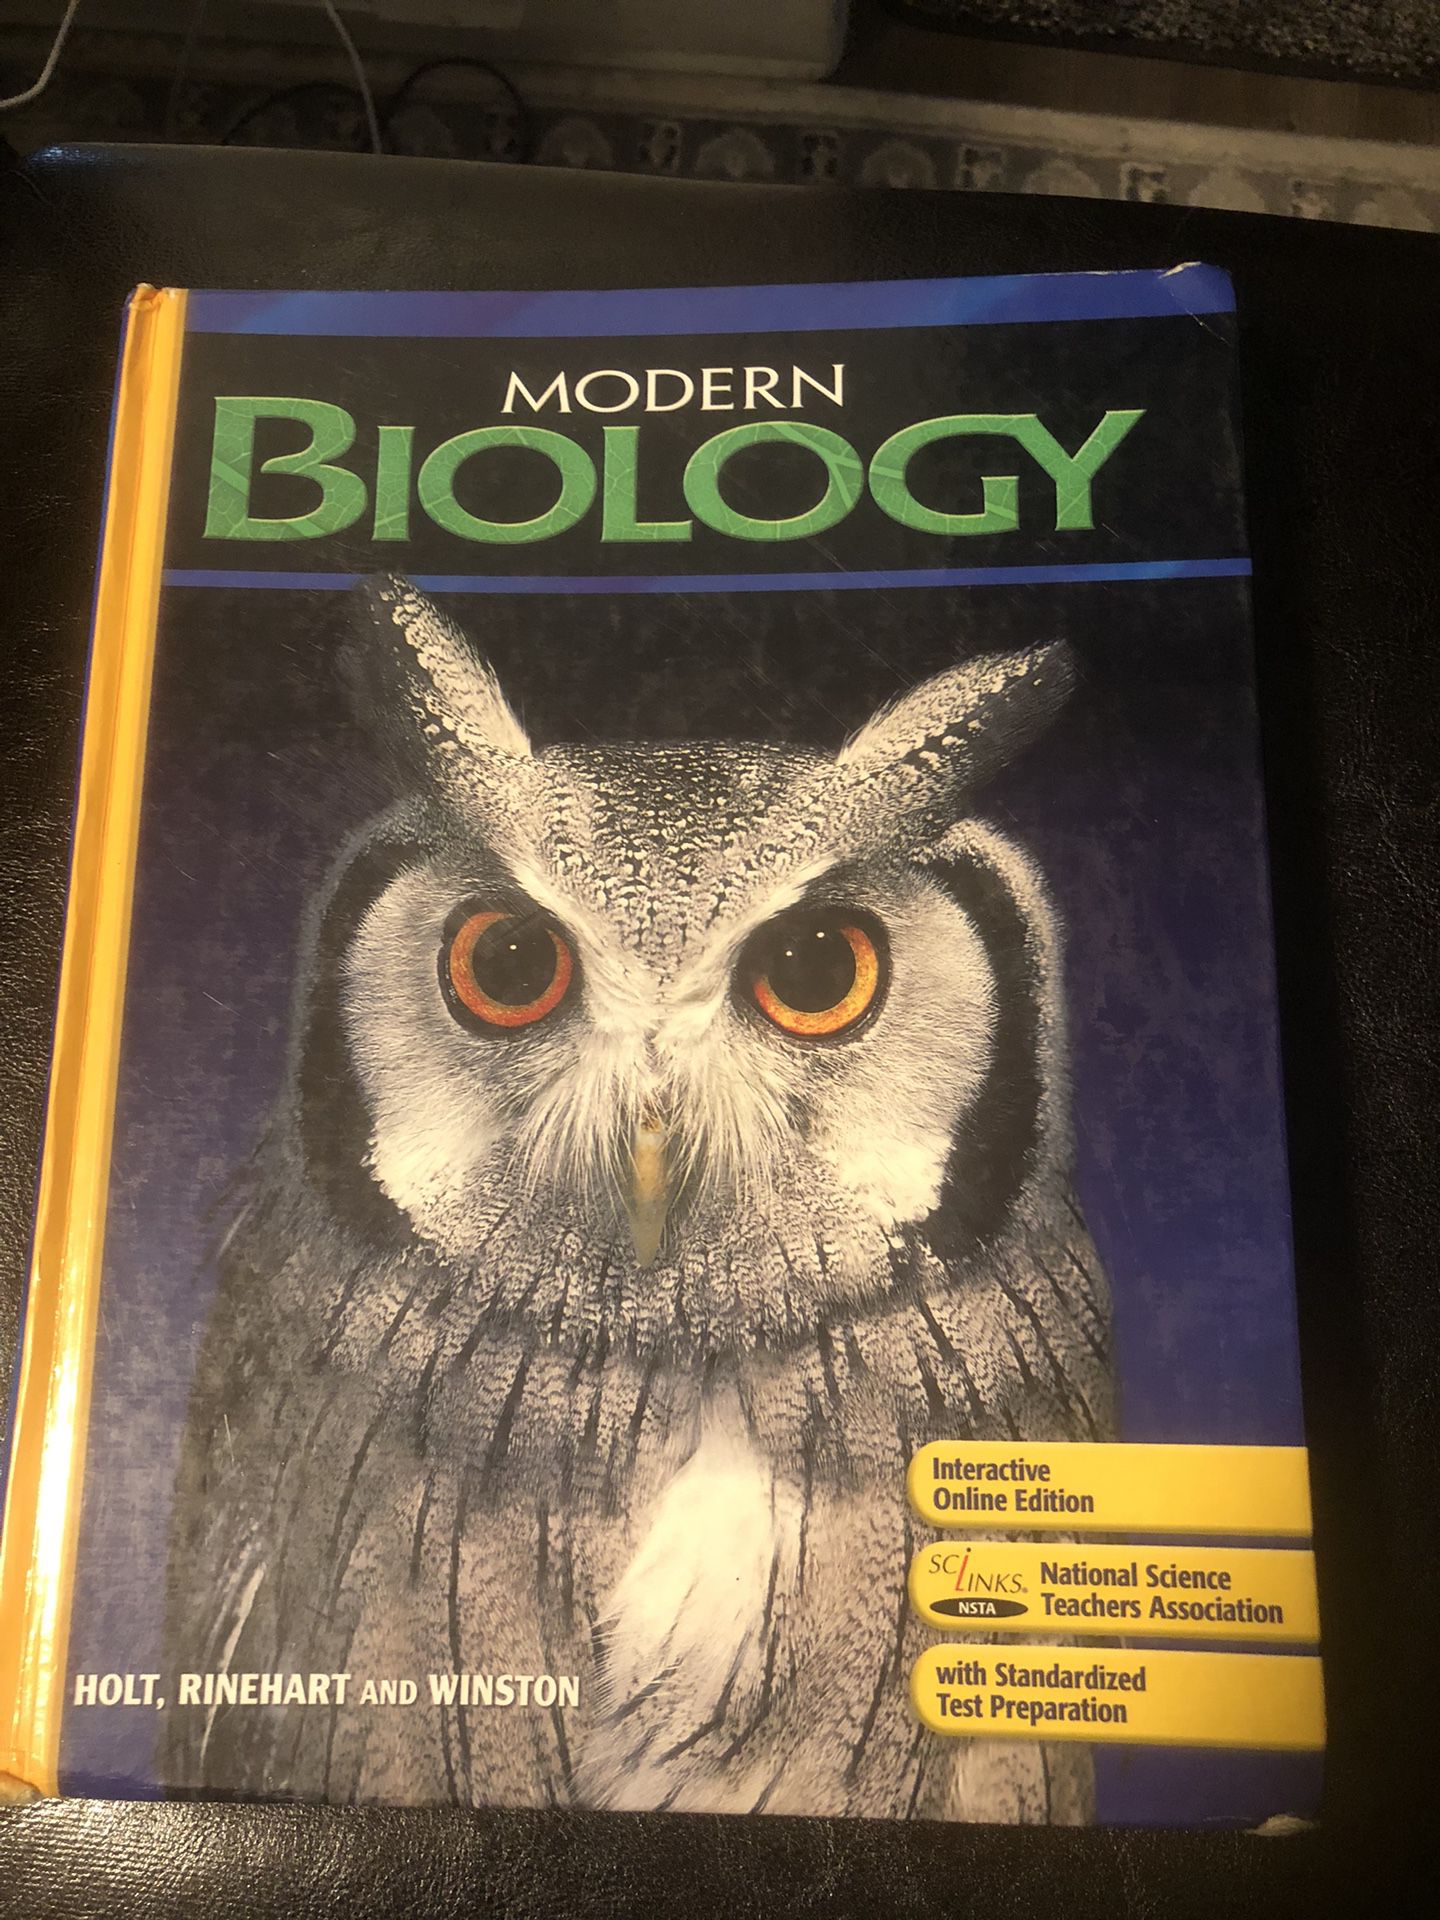 Modern Biology: Student Edition 2009 by Holt Rinehart & Winston is in good condition.  This book will be ship by media mail because it is very heavy f